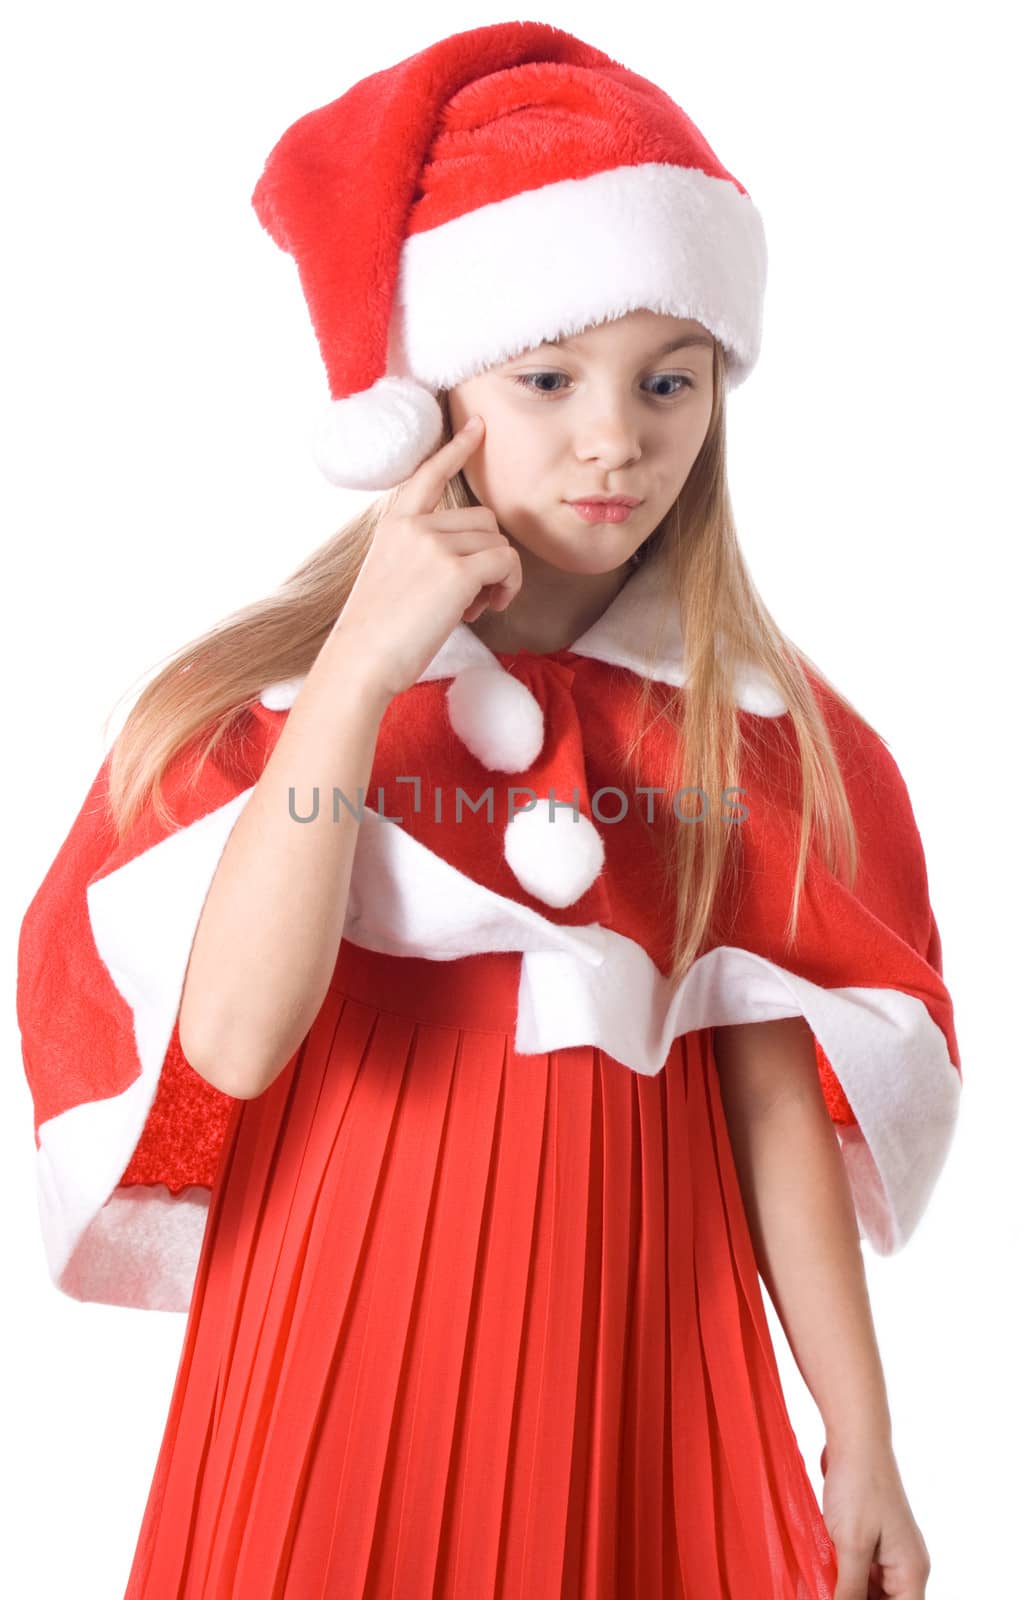 Christmas story. Girl thinking about gifts for Christmas